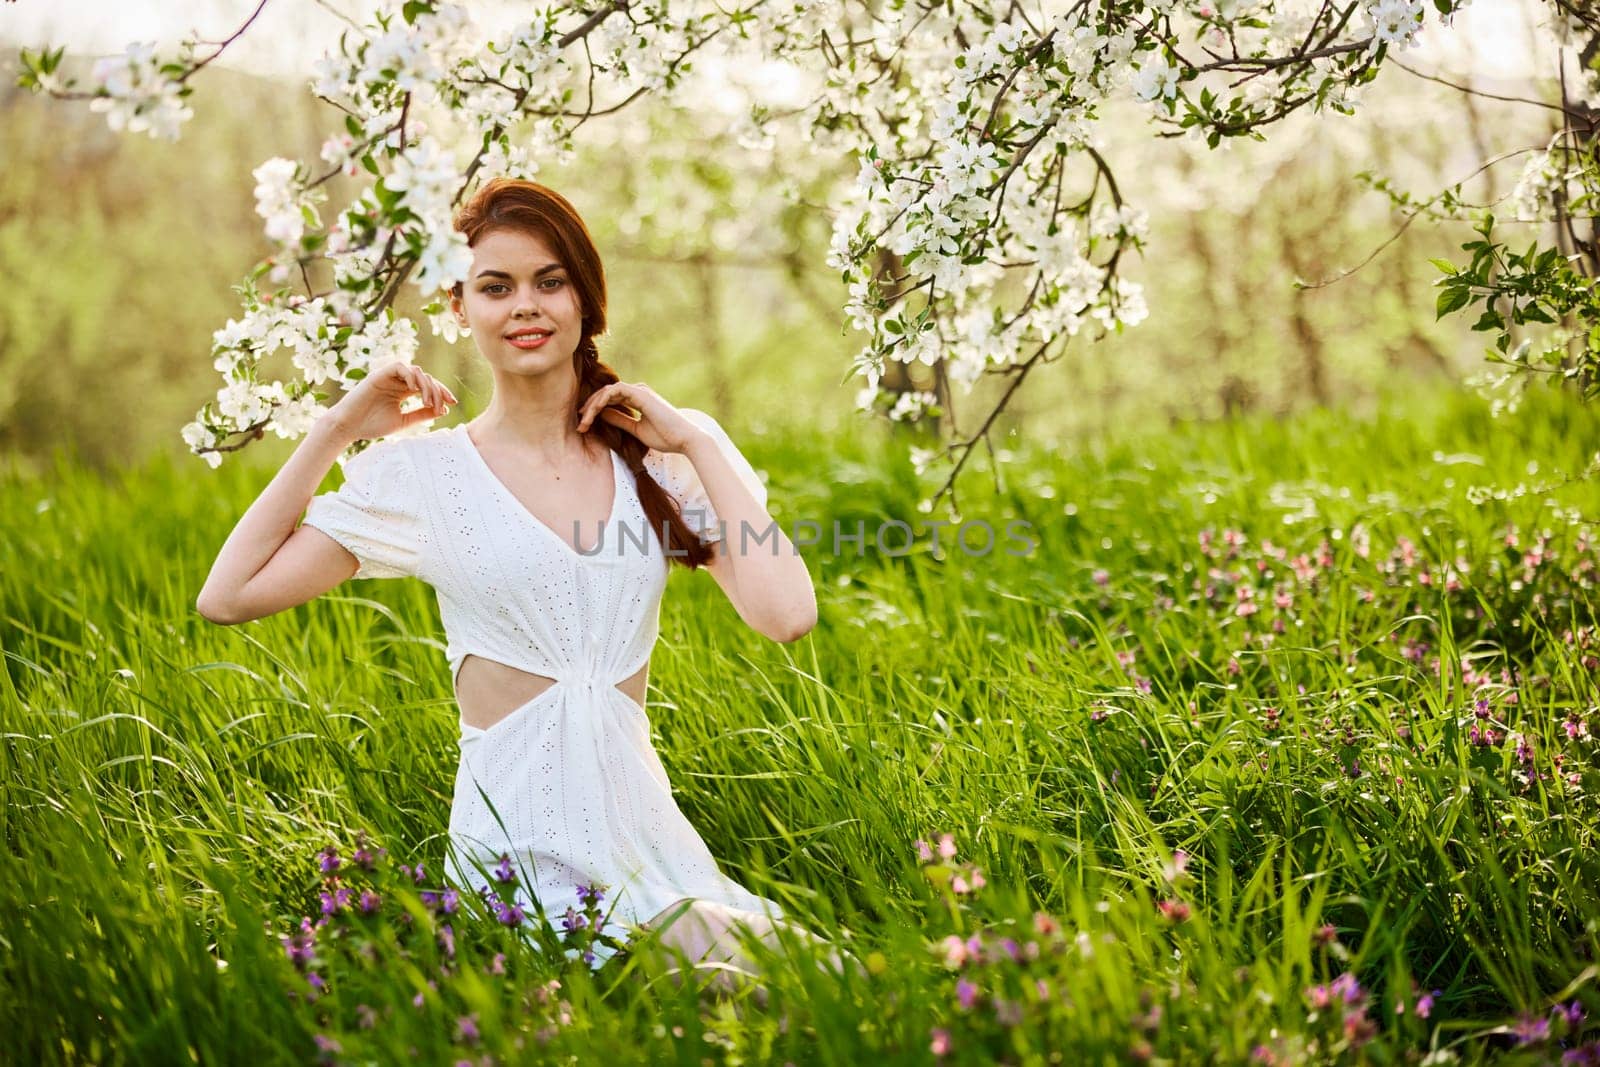 Beautiful woman in a blooming spring garden in a light dress smiling looking at the camera. High quality photo